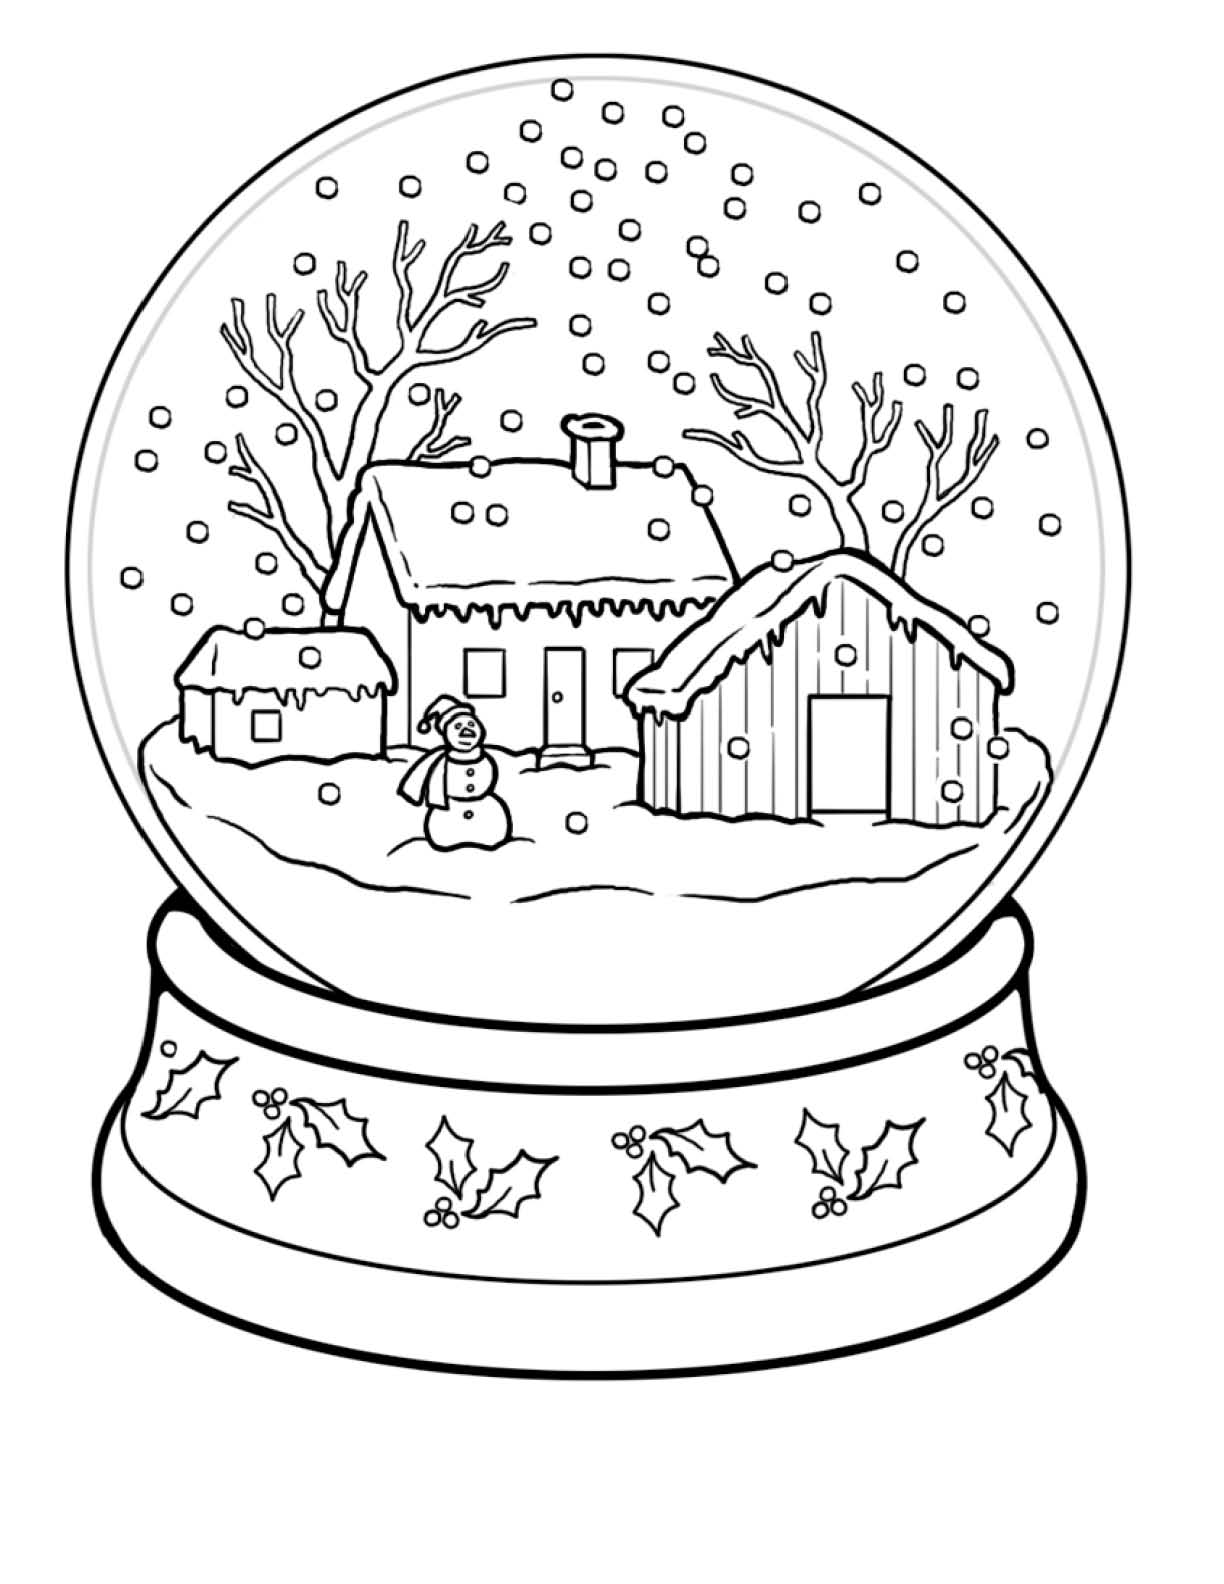 Snowglobe Coloring Pages Best Coloring Pages For Kids